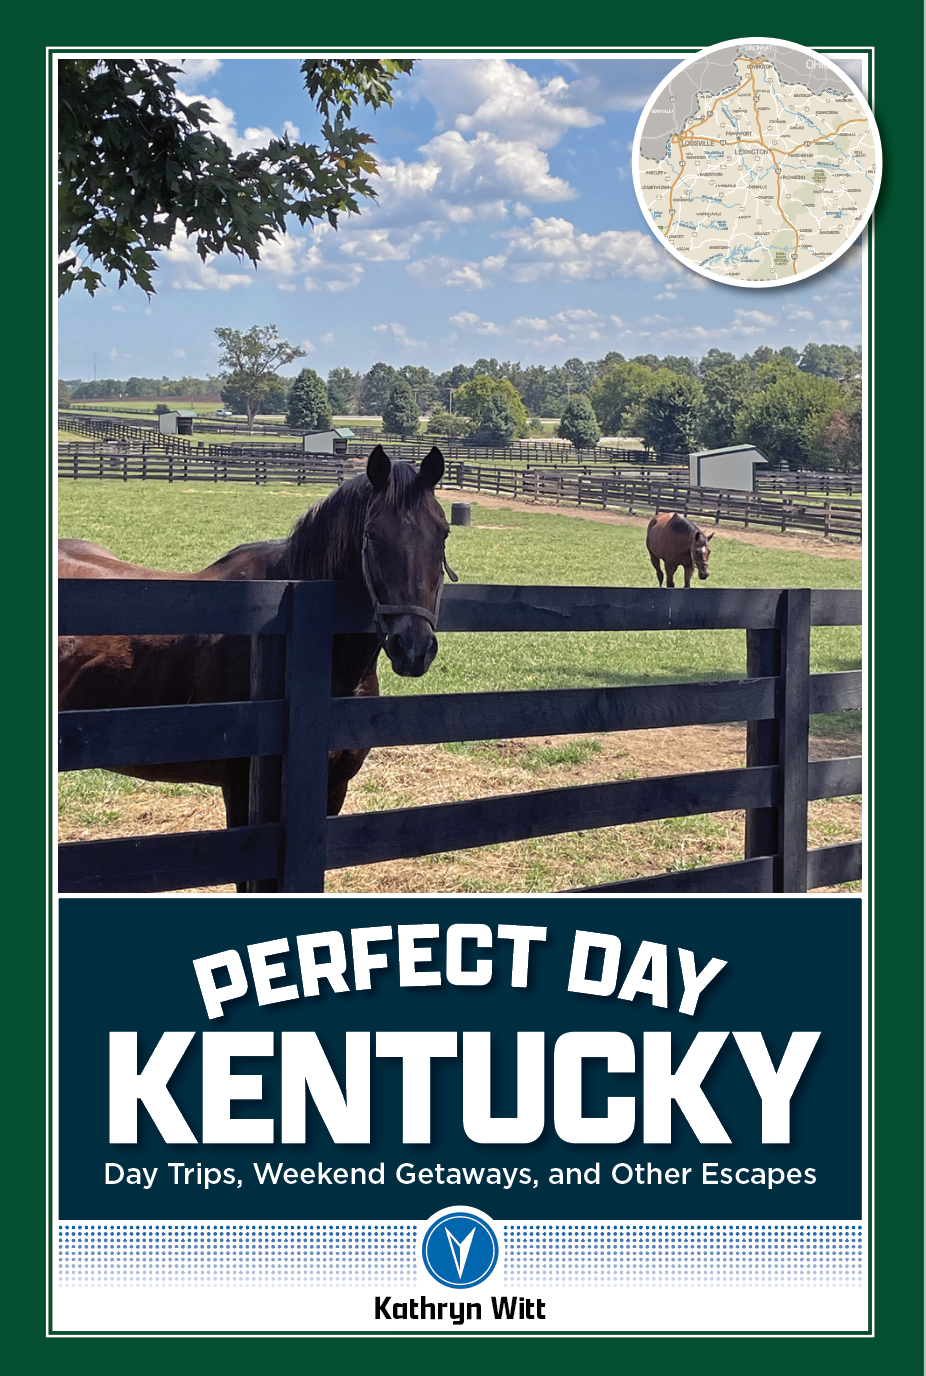 "Heaven must be a Kentucky kind of place."